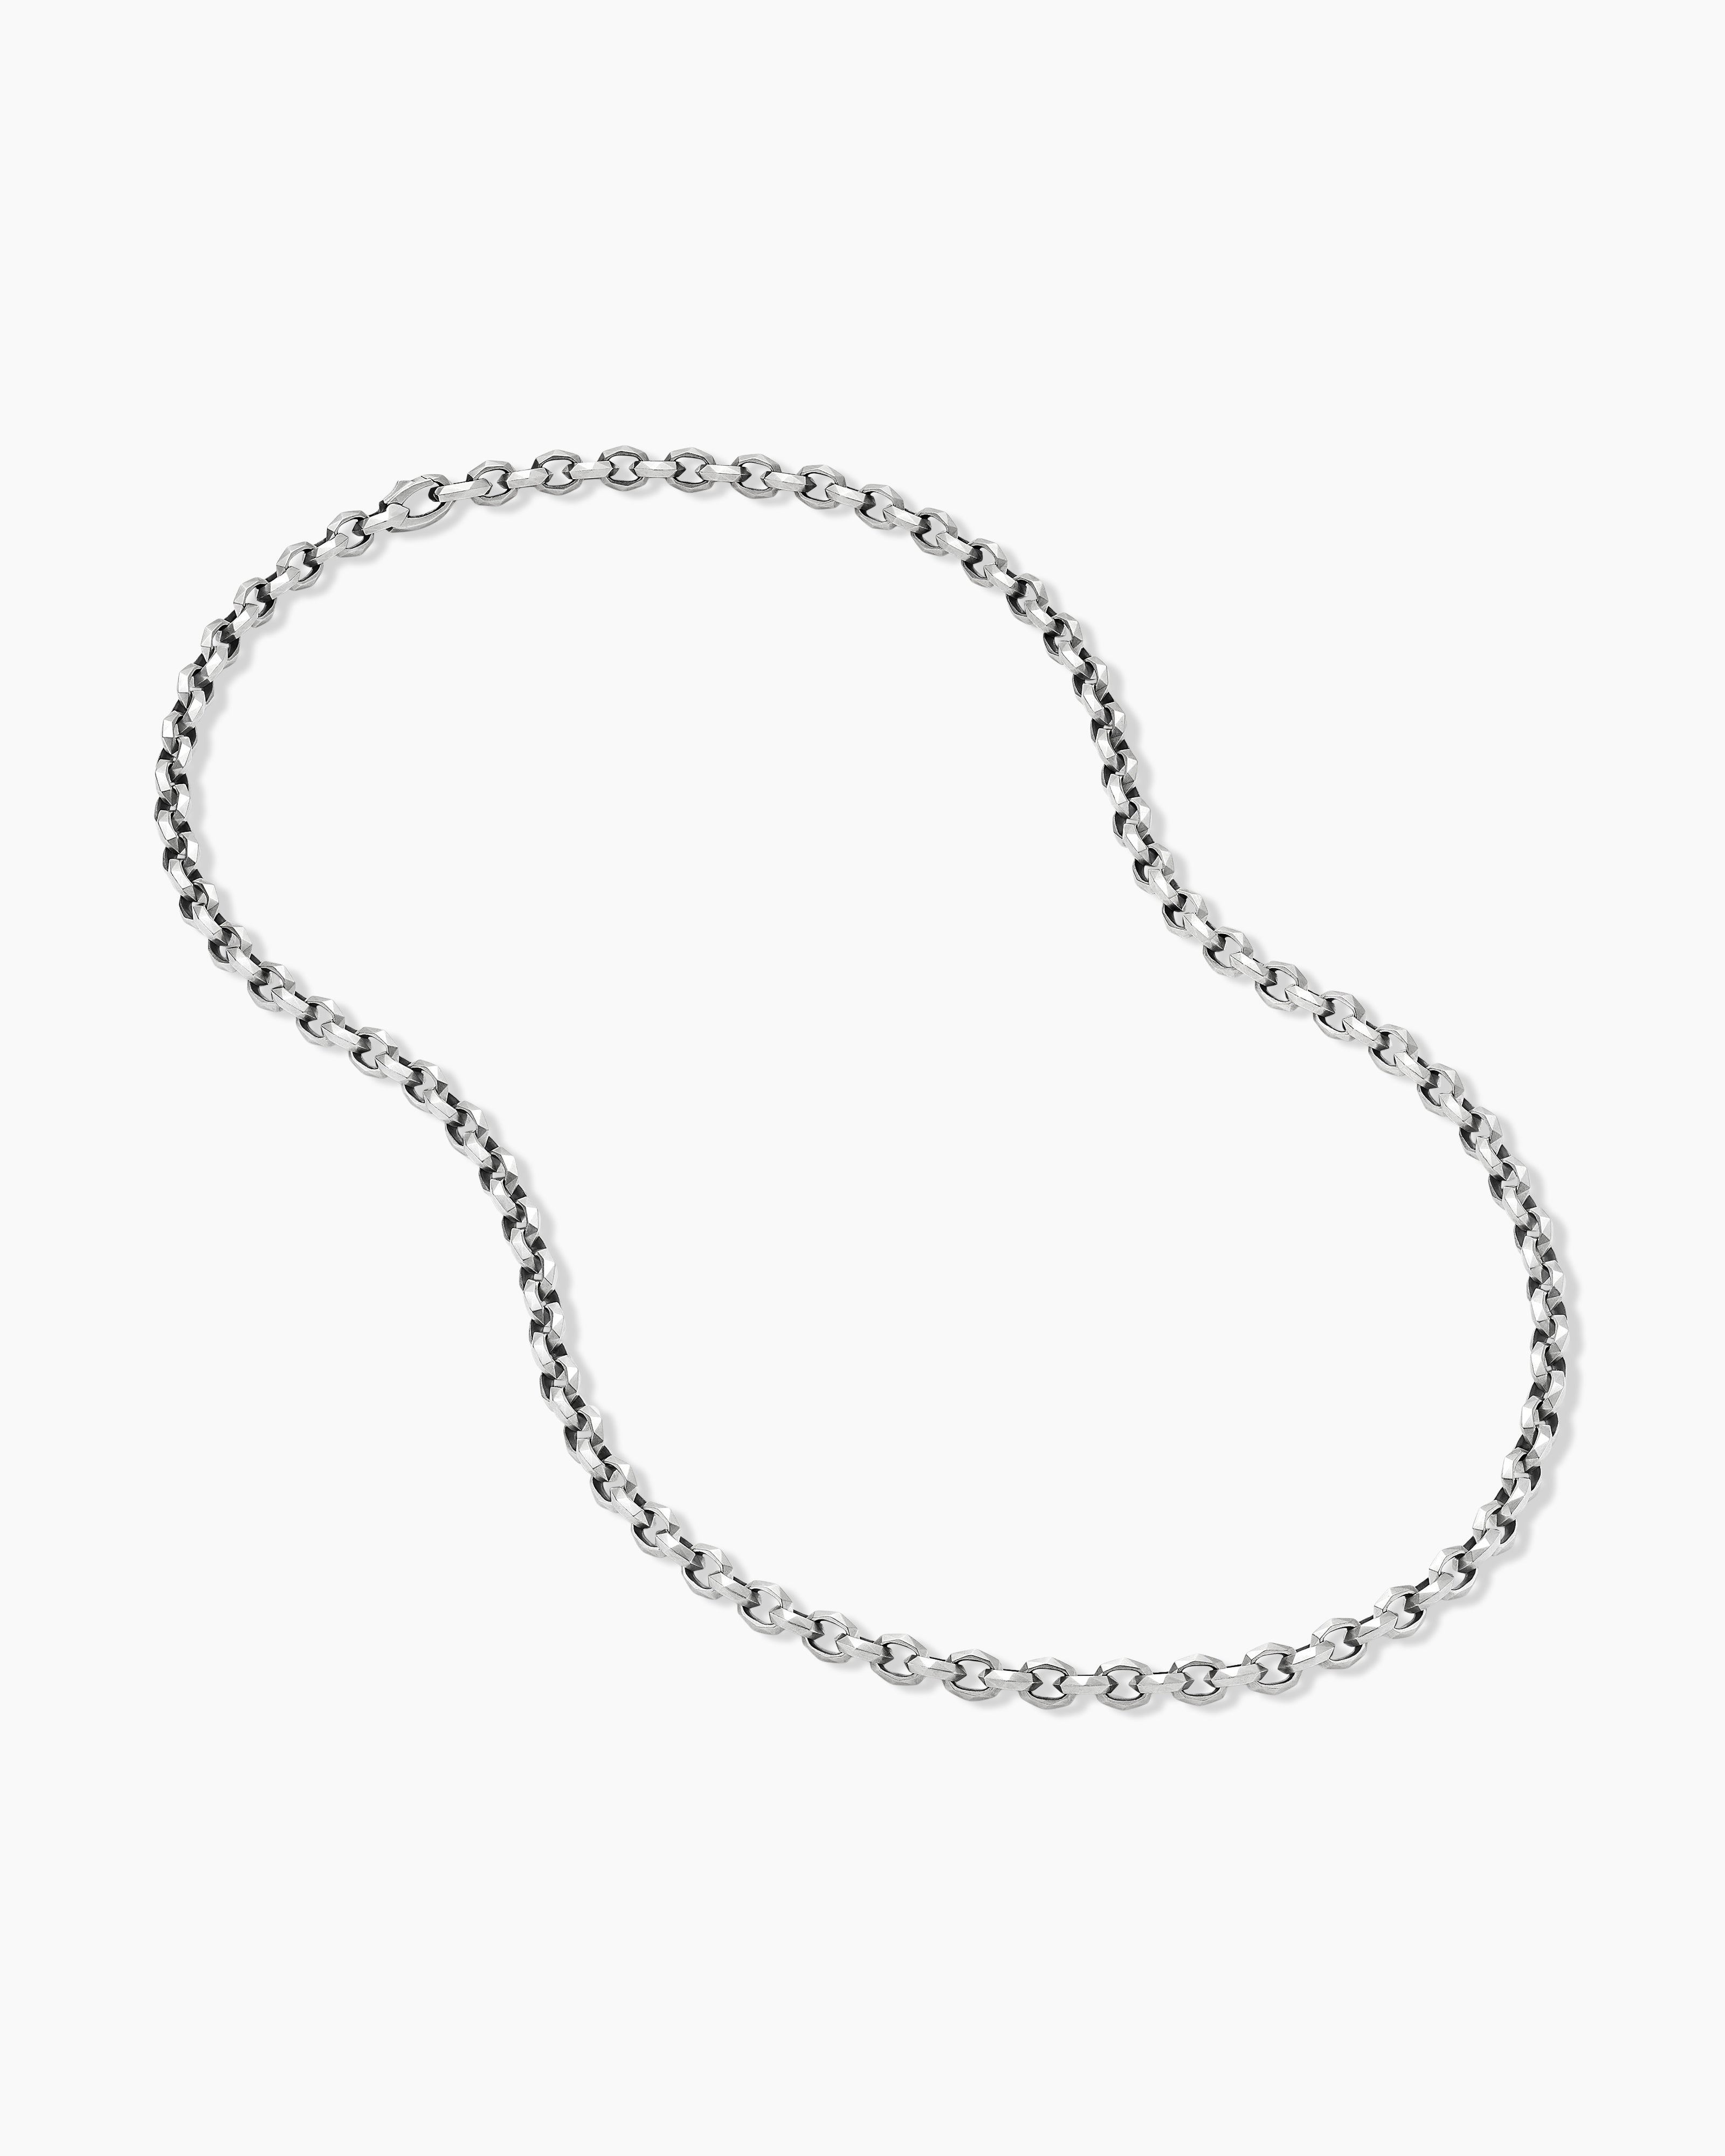 Torqued Faceted Chain Link Necklace in Sterling Silver, 7mm